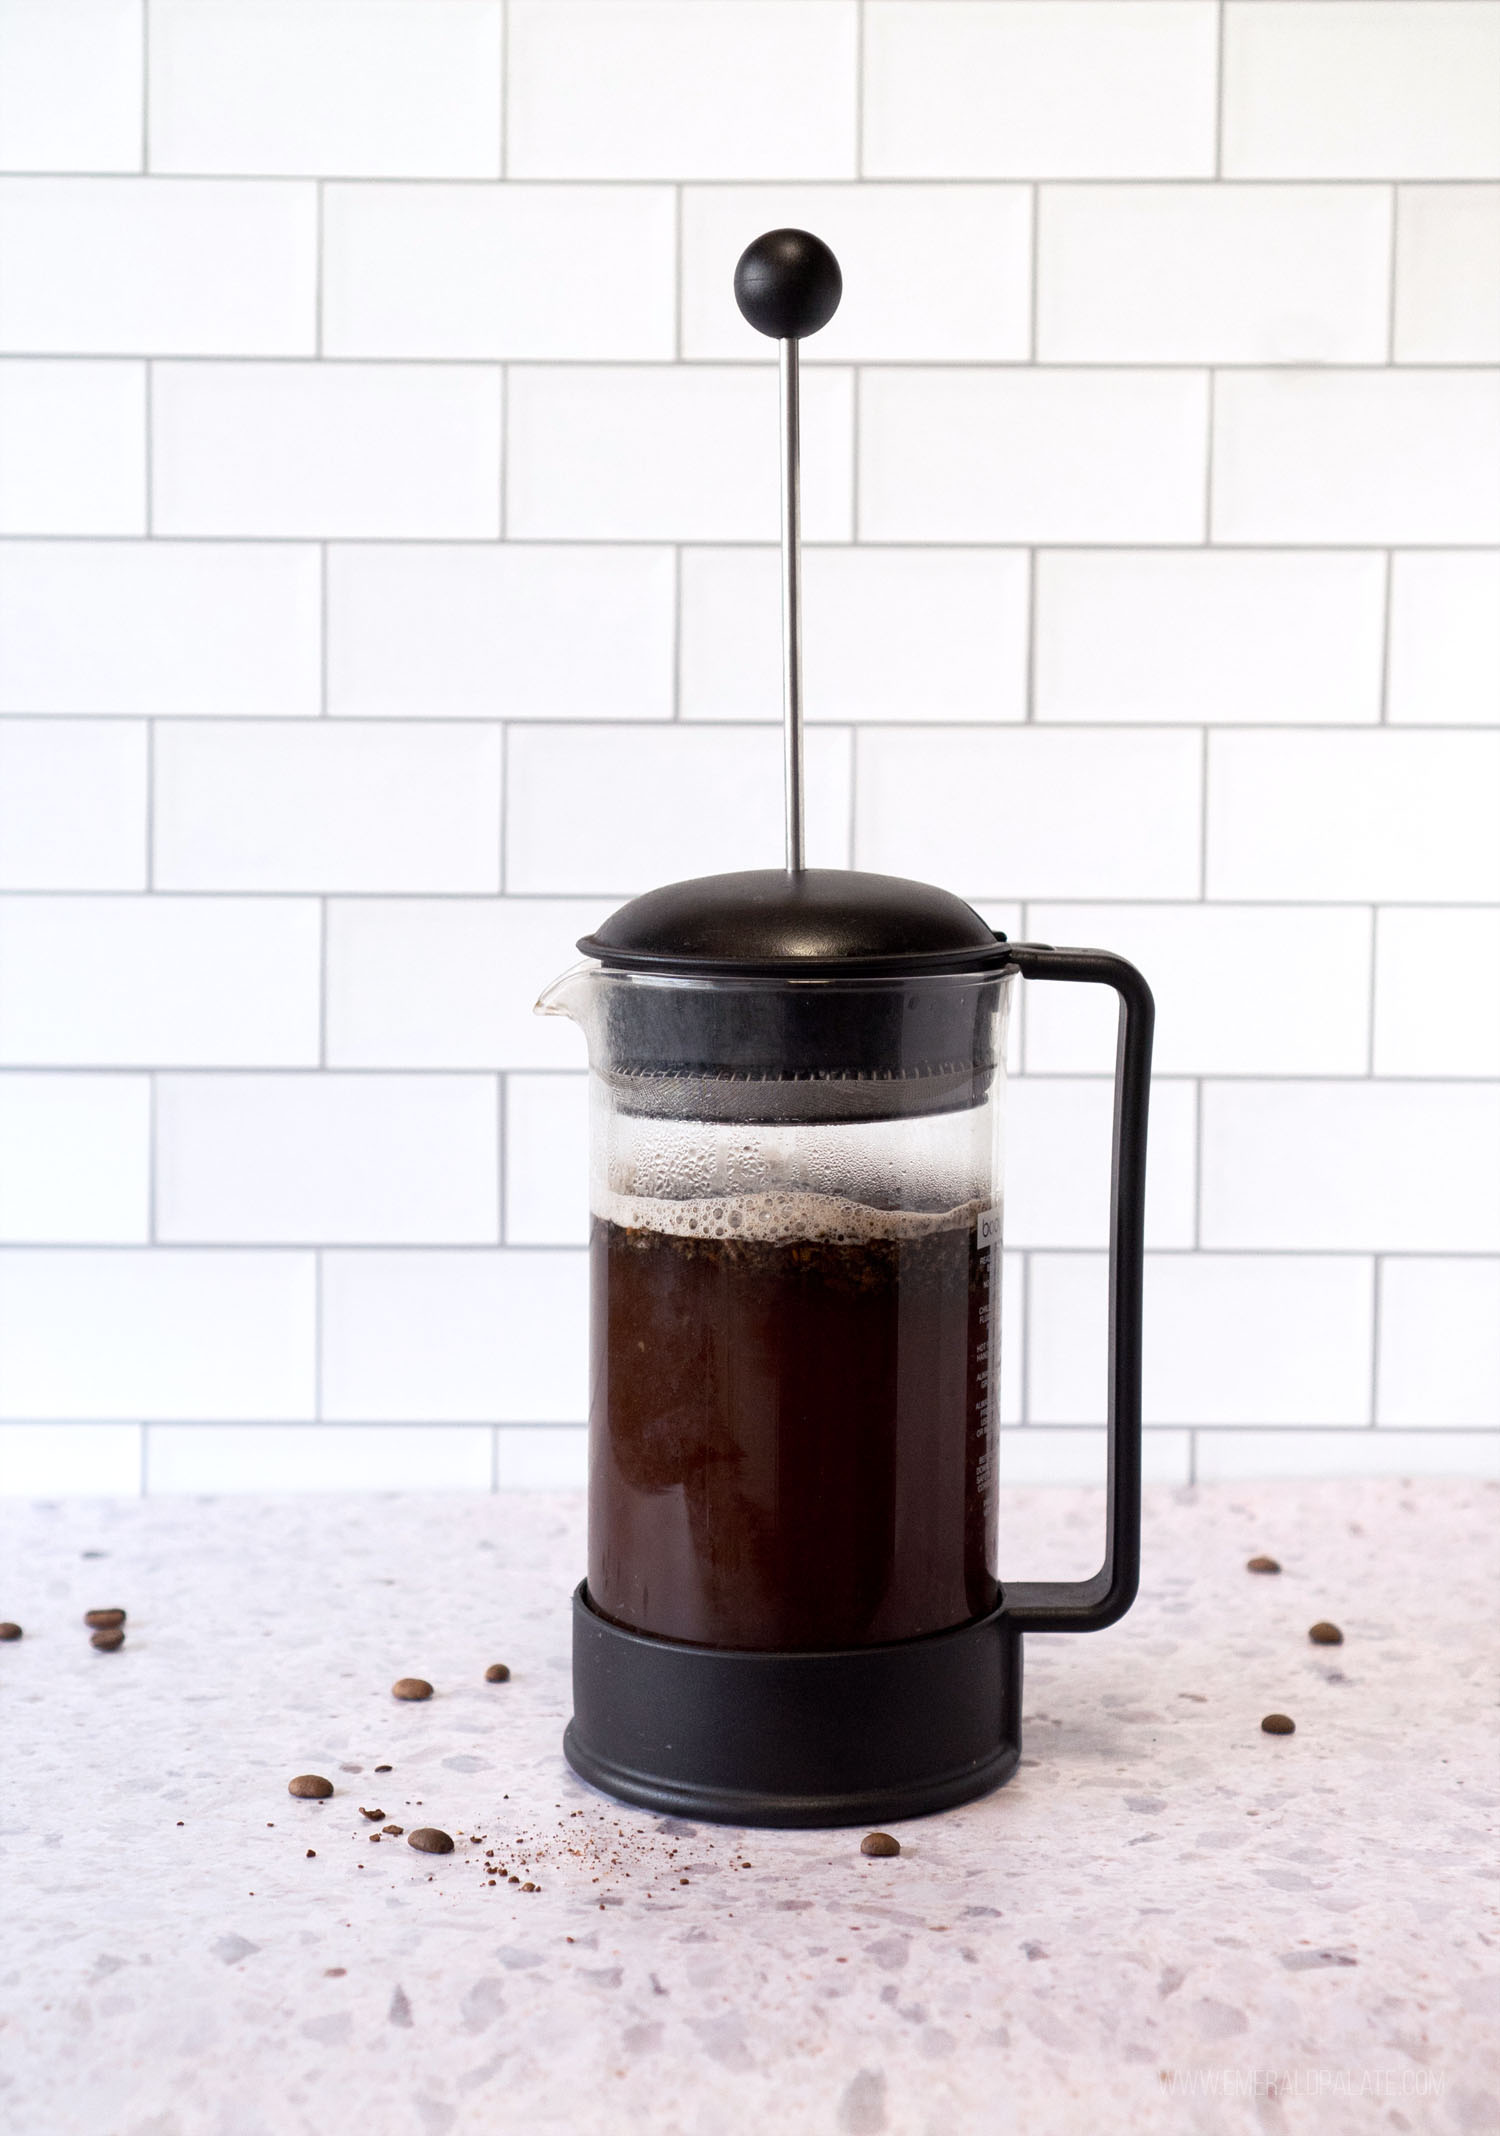 https://www.emeraldpalate.com/wp-content/uploads/2021/04/Best-Coffee-for-French-Press-French-press-filled-lowres.jpg